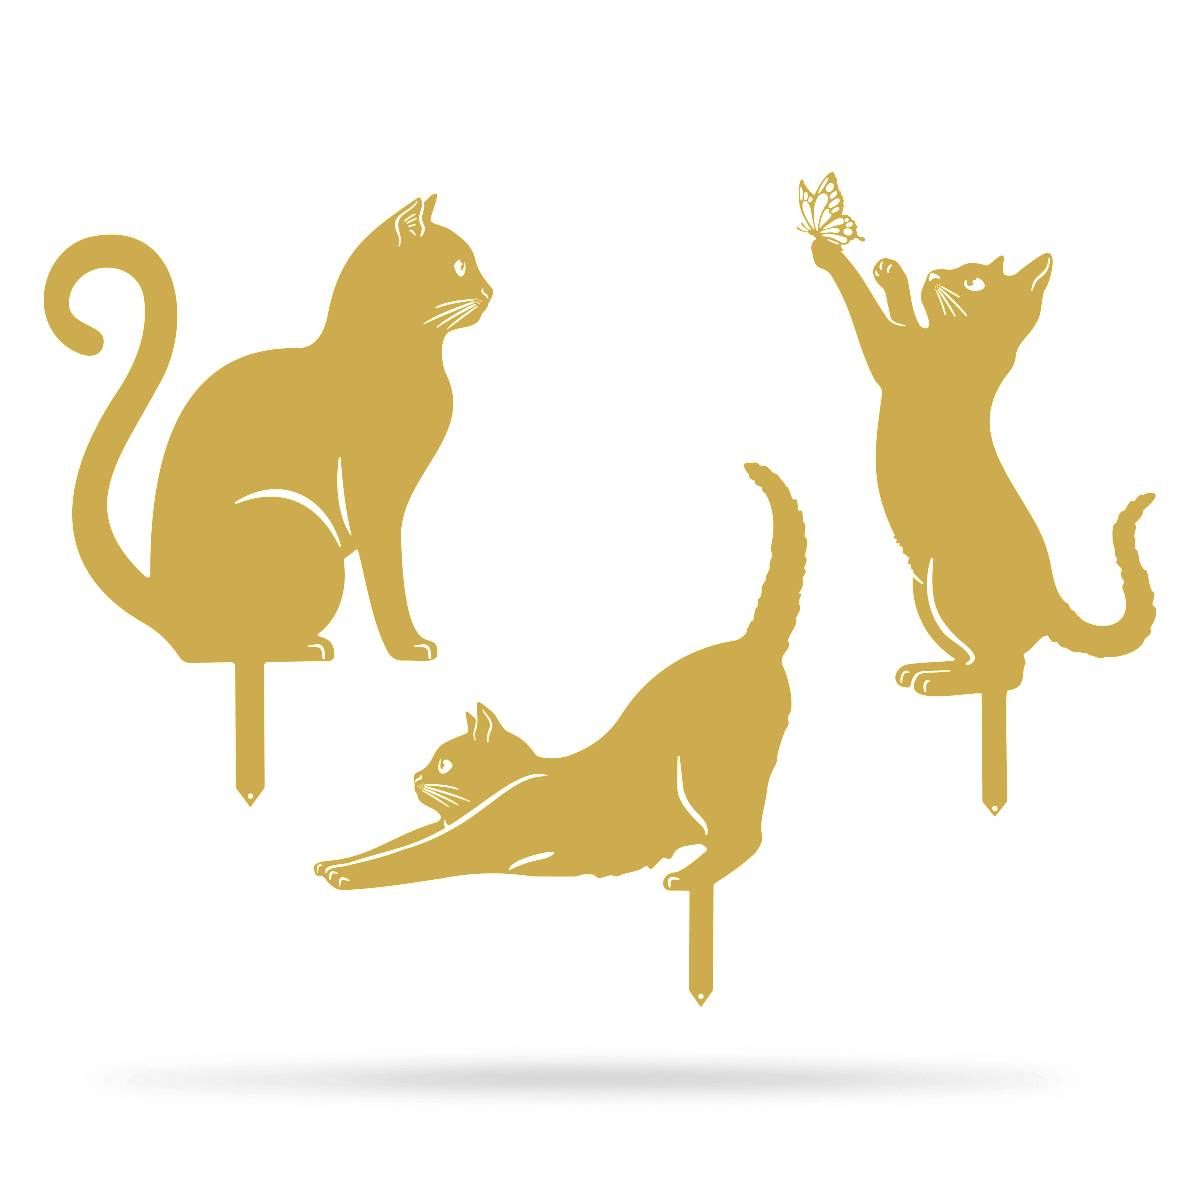 Cats 3 Pack Garden Stakes